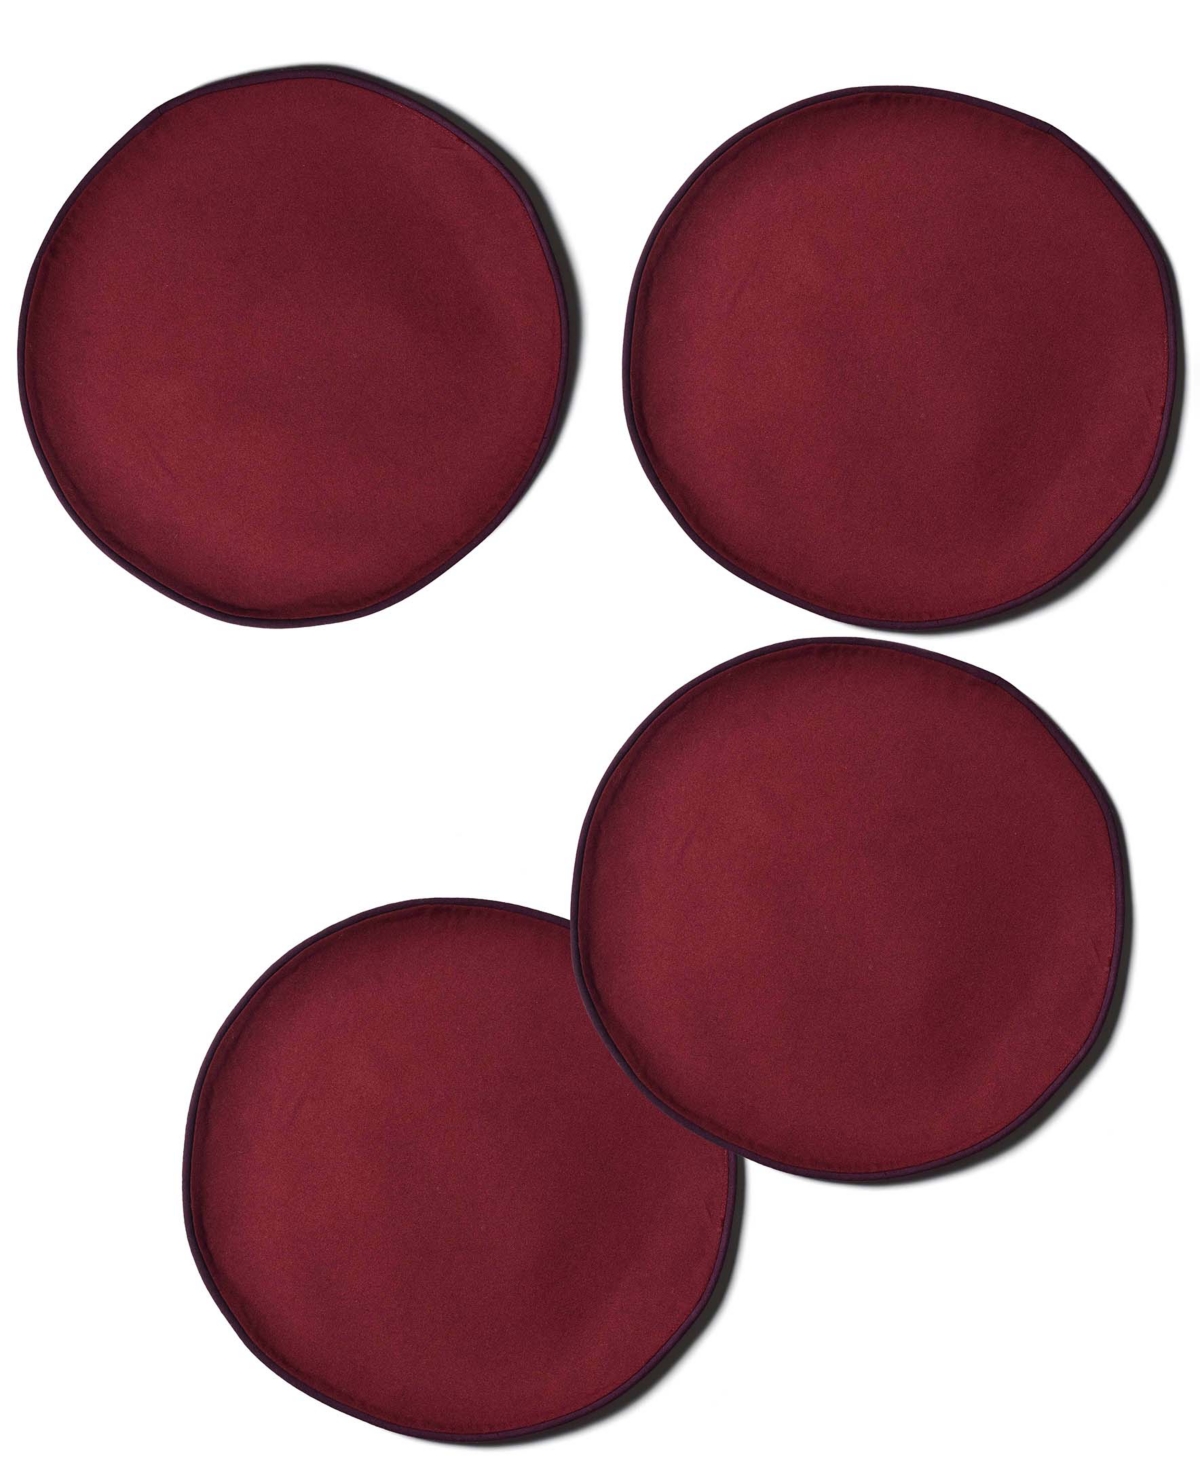 Coton Colors Block Round Placemat Set Of 4, Service For 4 In Coquette